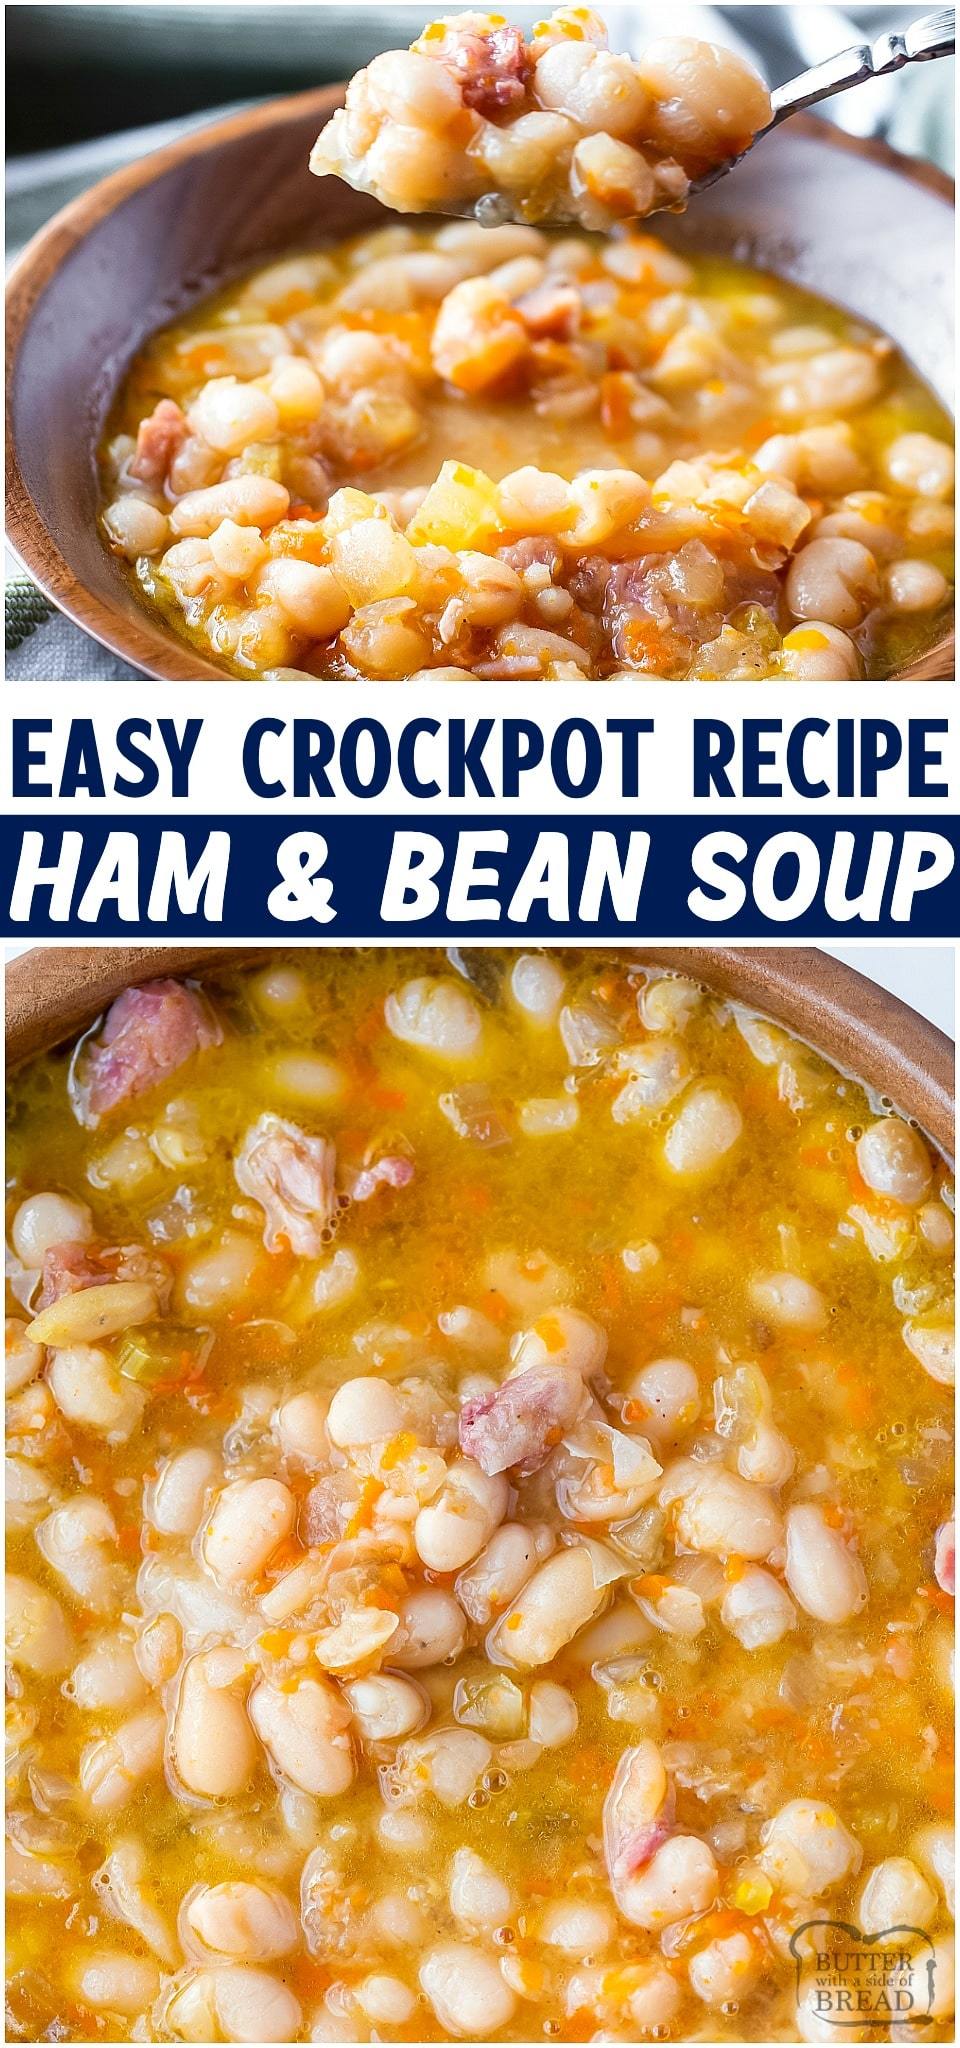 Crockpot ham and bean soup made easy with a ham bone, dried beans & vegetables. Simple & flavorful slow cooker recipe that uses leftover ham and pantry ingredients. #ham #hambeansoup #hamhock #slowcooker #crockpot #souprecipe from BUTTER WITH A SIDE OF BREAD